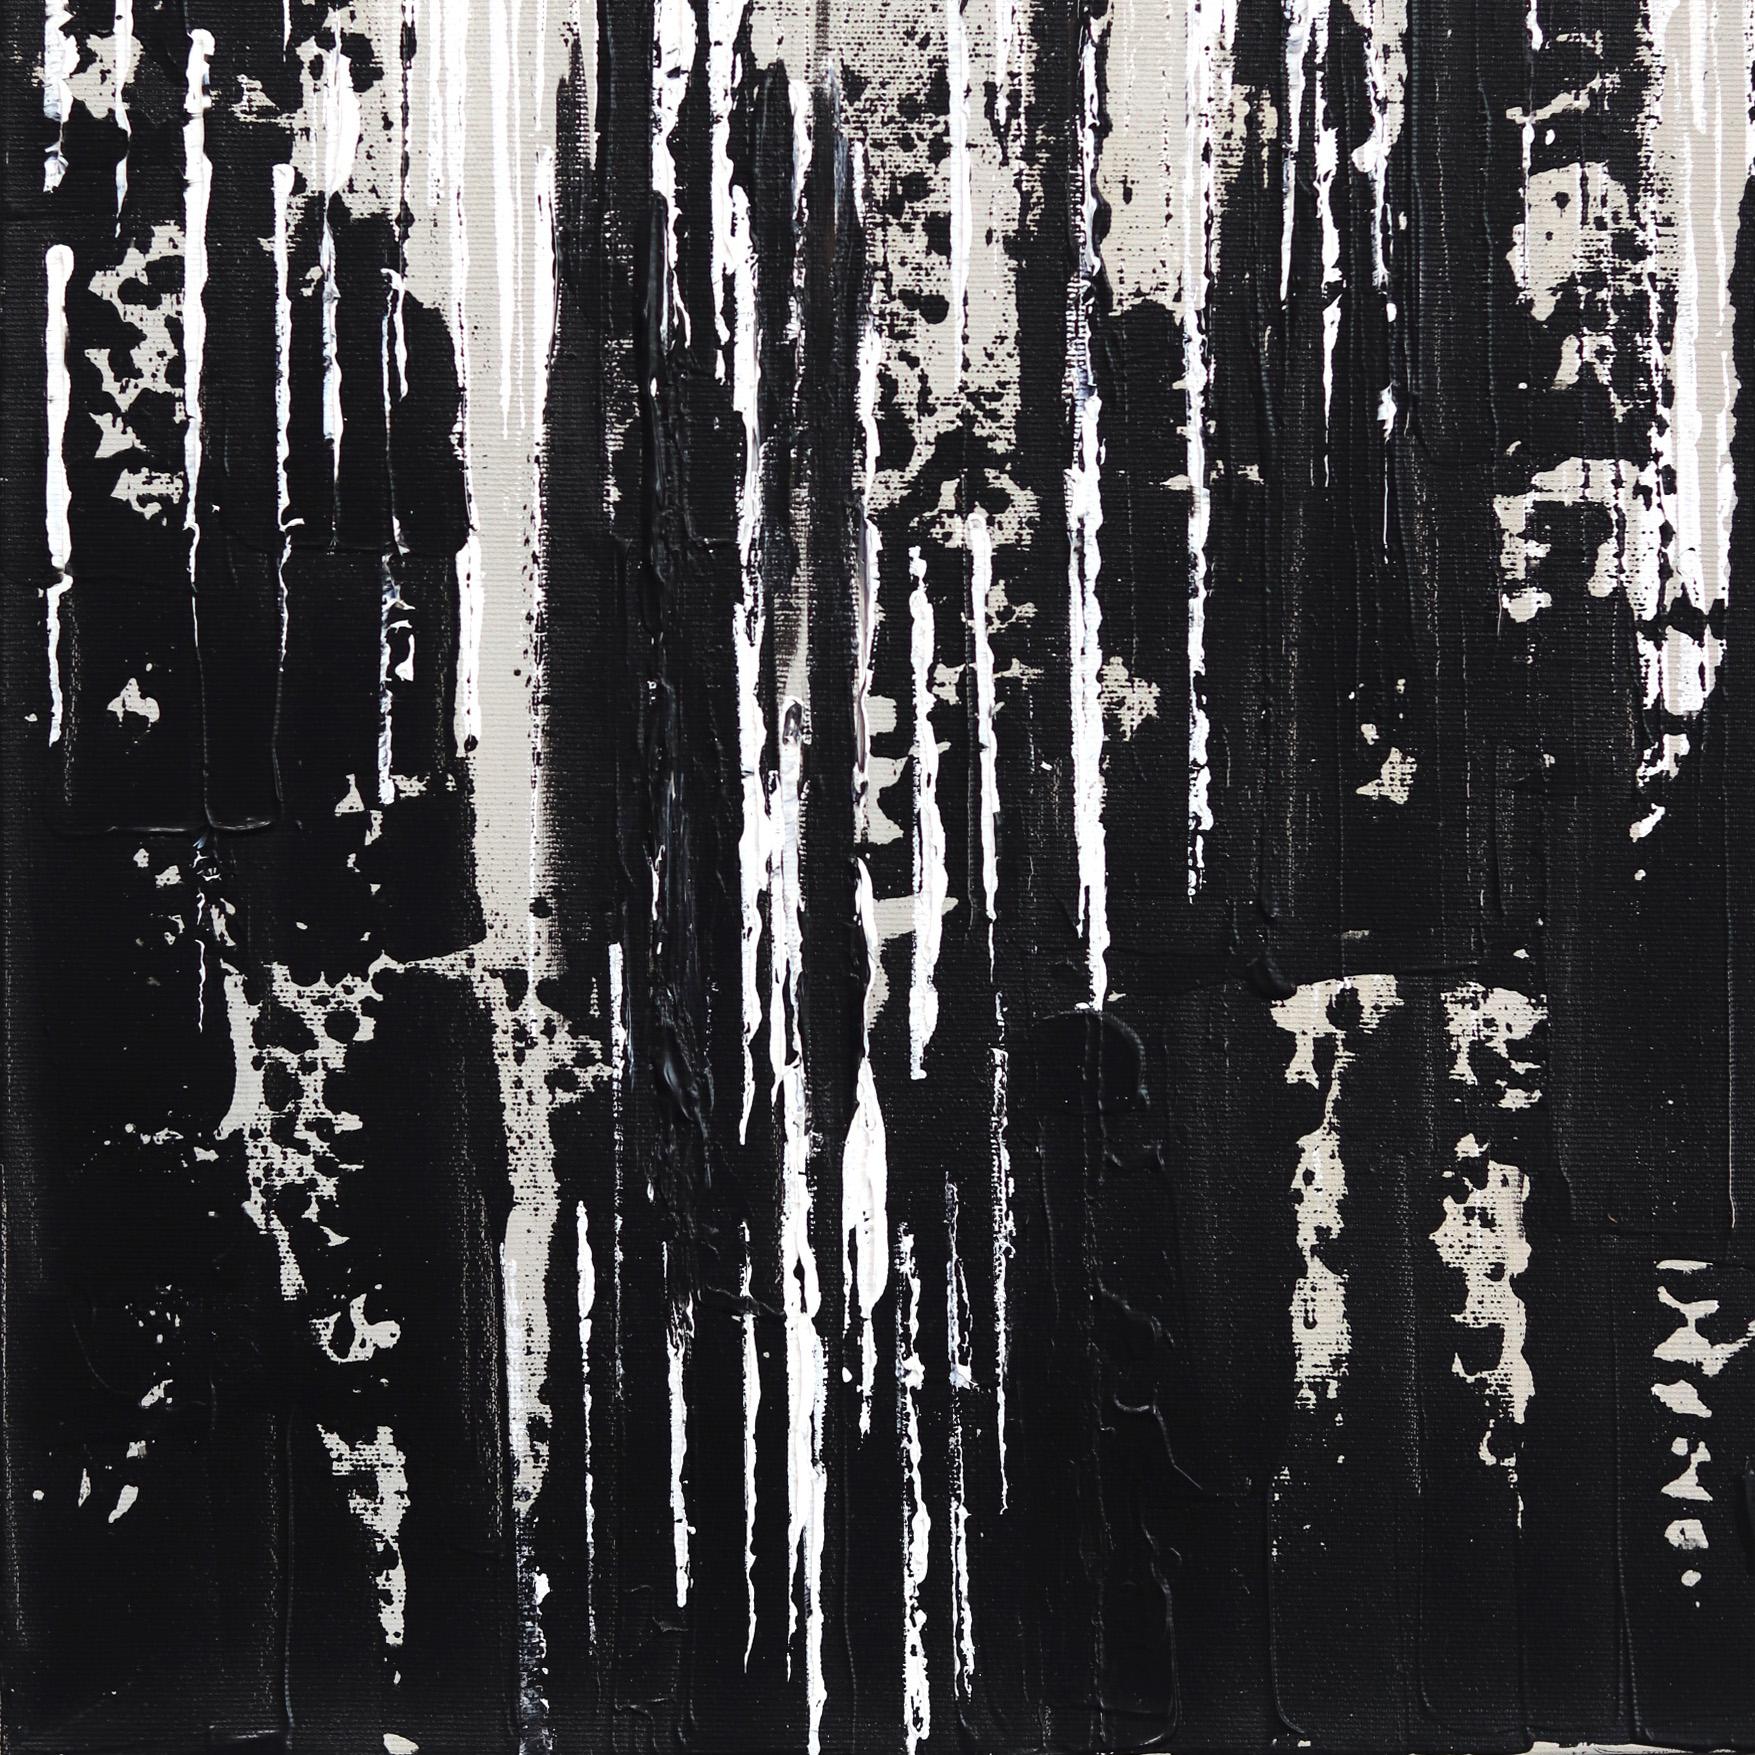 Between the Lines 1 - Black Landscape Painting by Ivana Milosevic